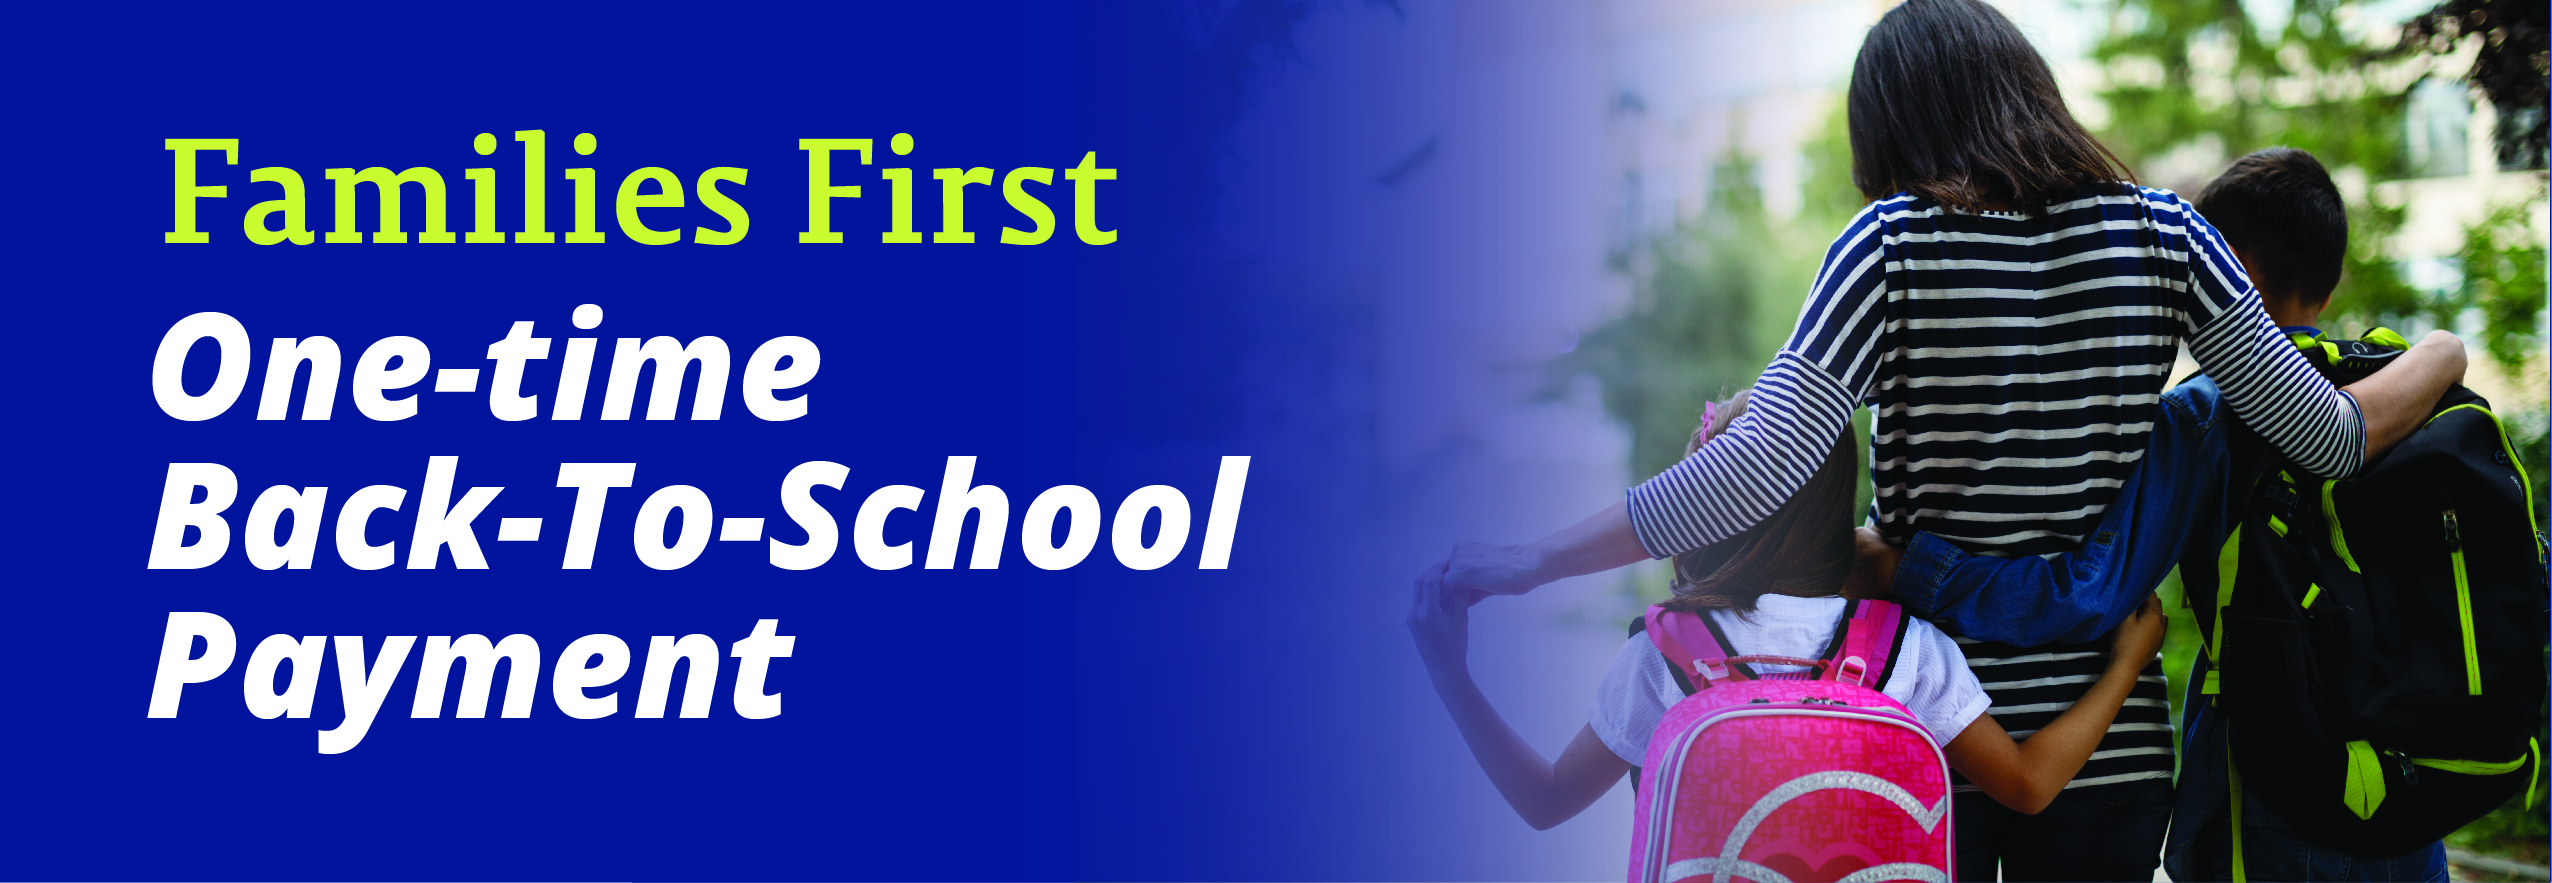 Families First Participants to Receive a One-Time Back-to-School